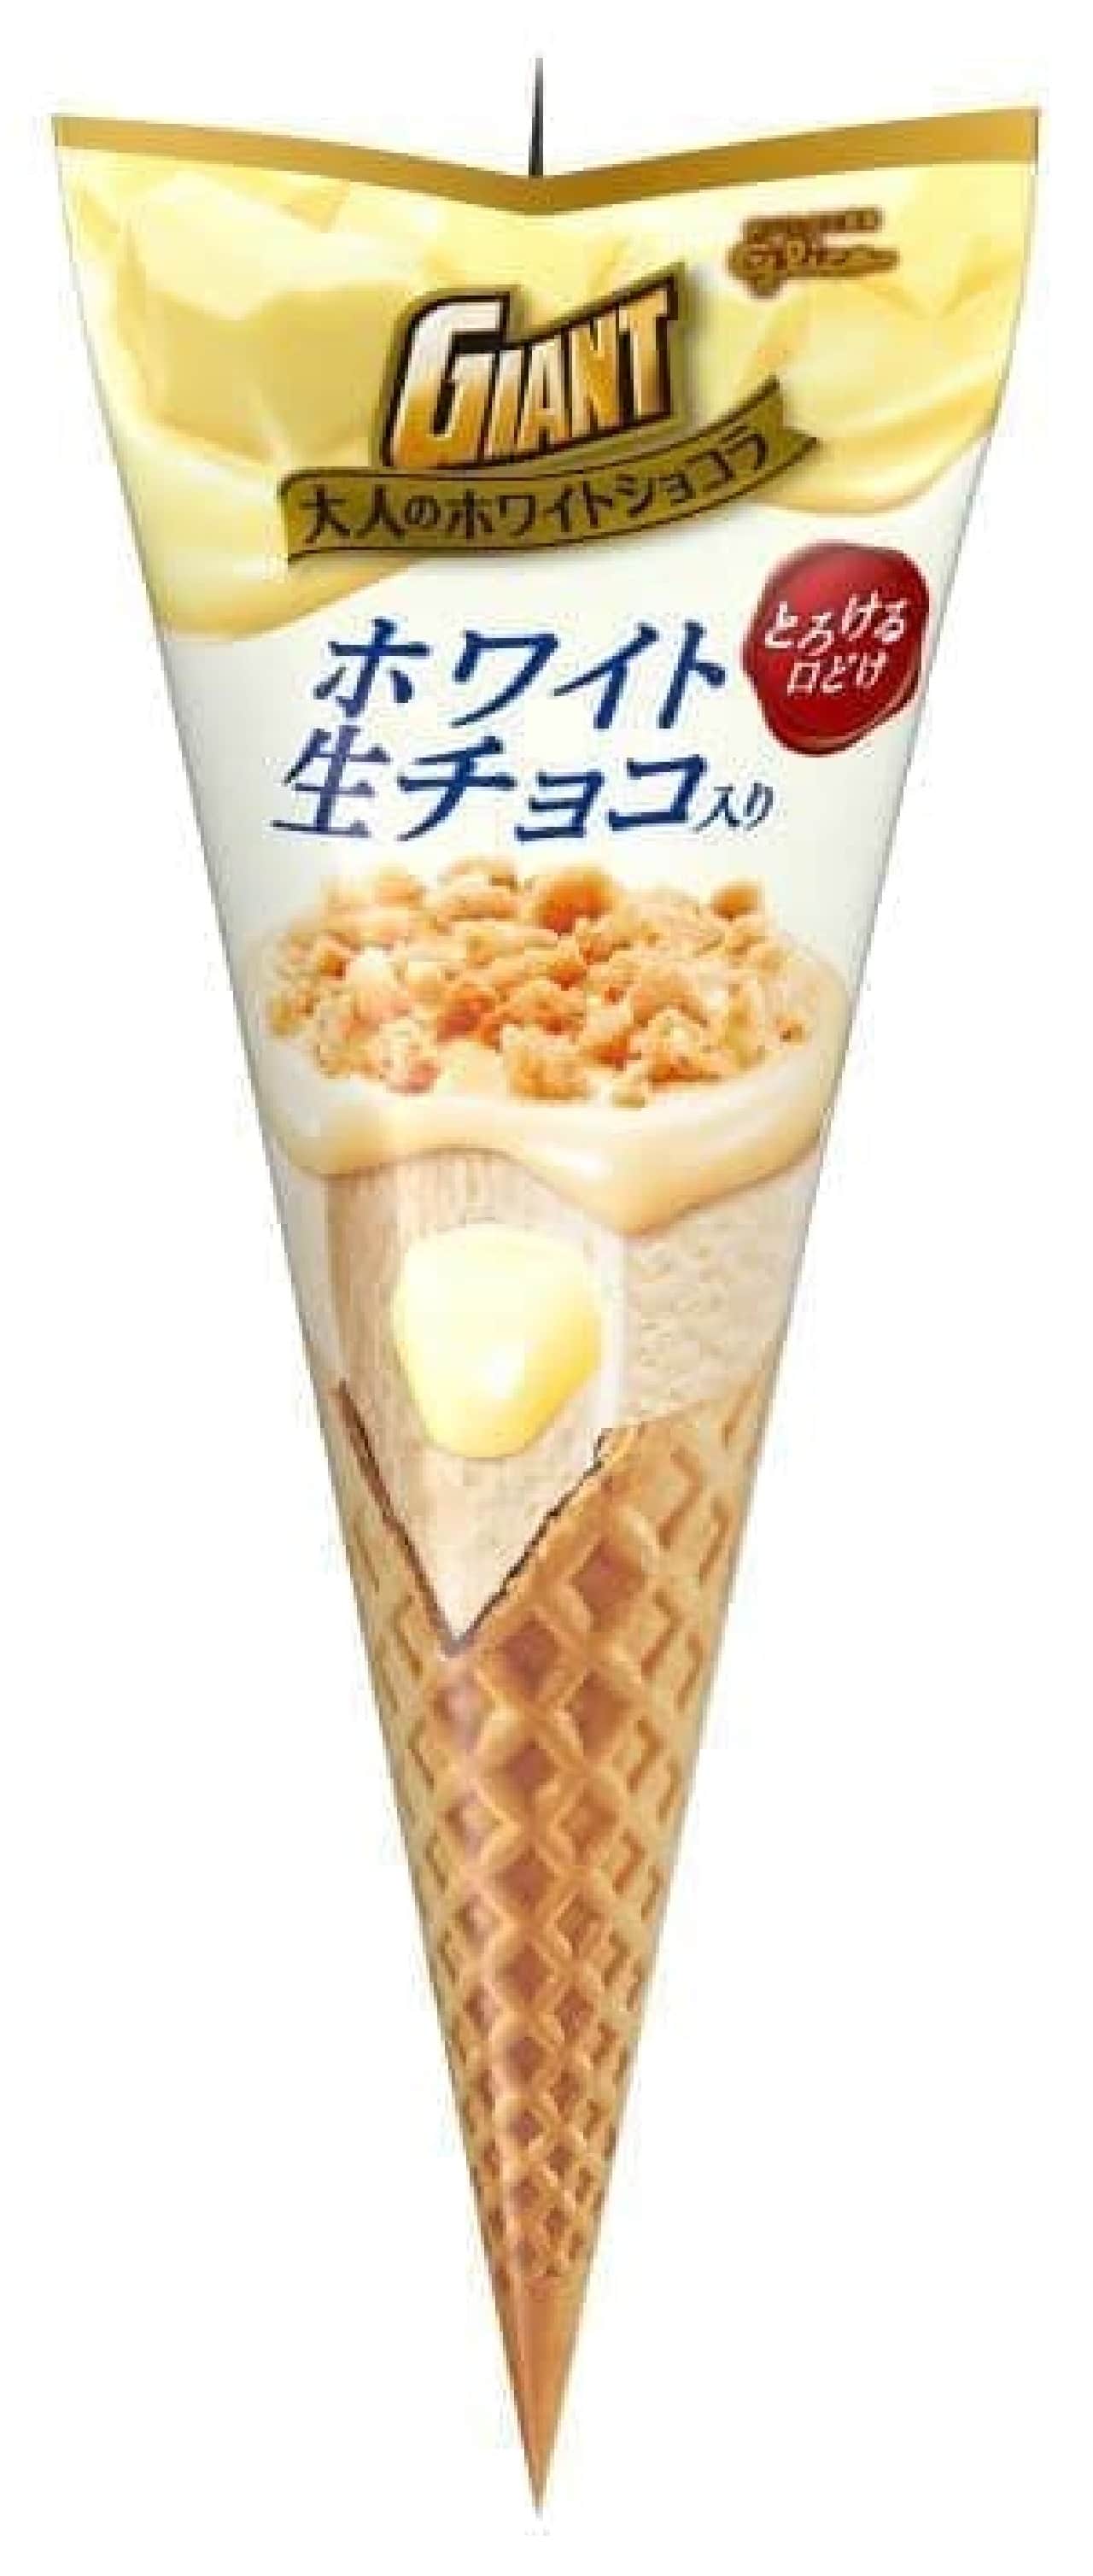 7-ELEVEN limited "Giant corn [adult white chocolate]"